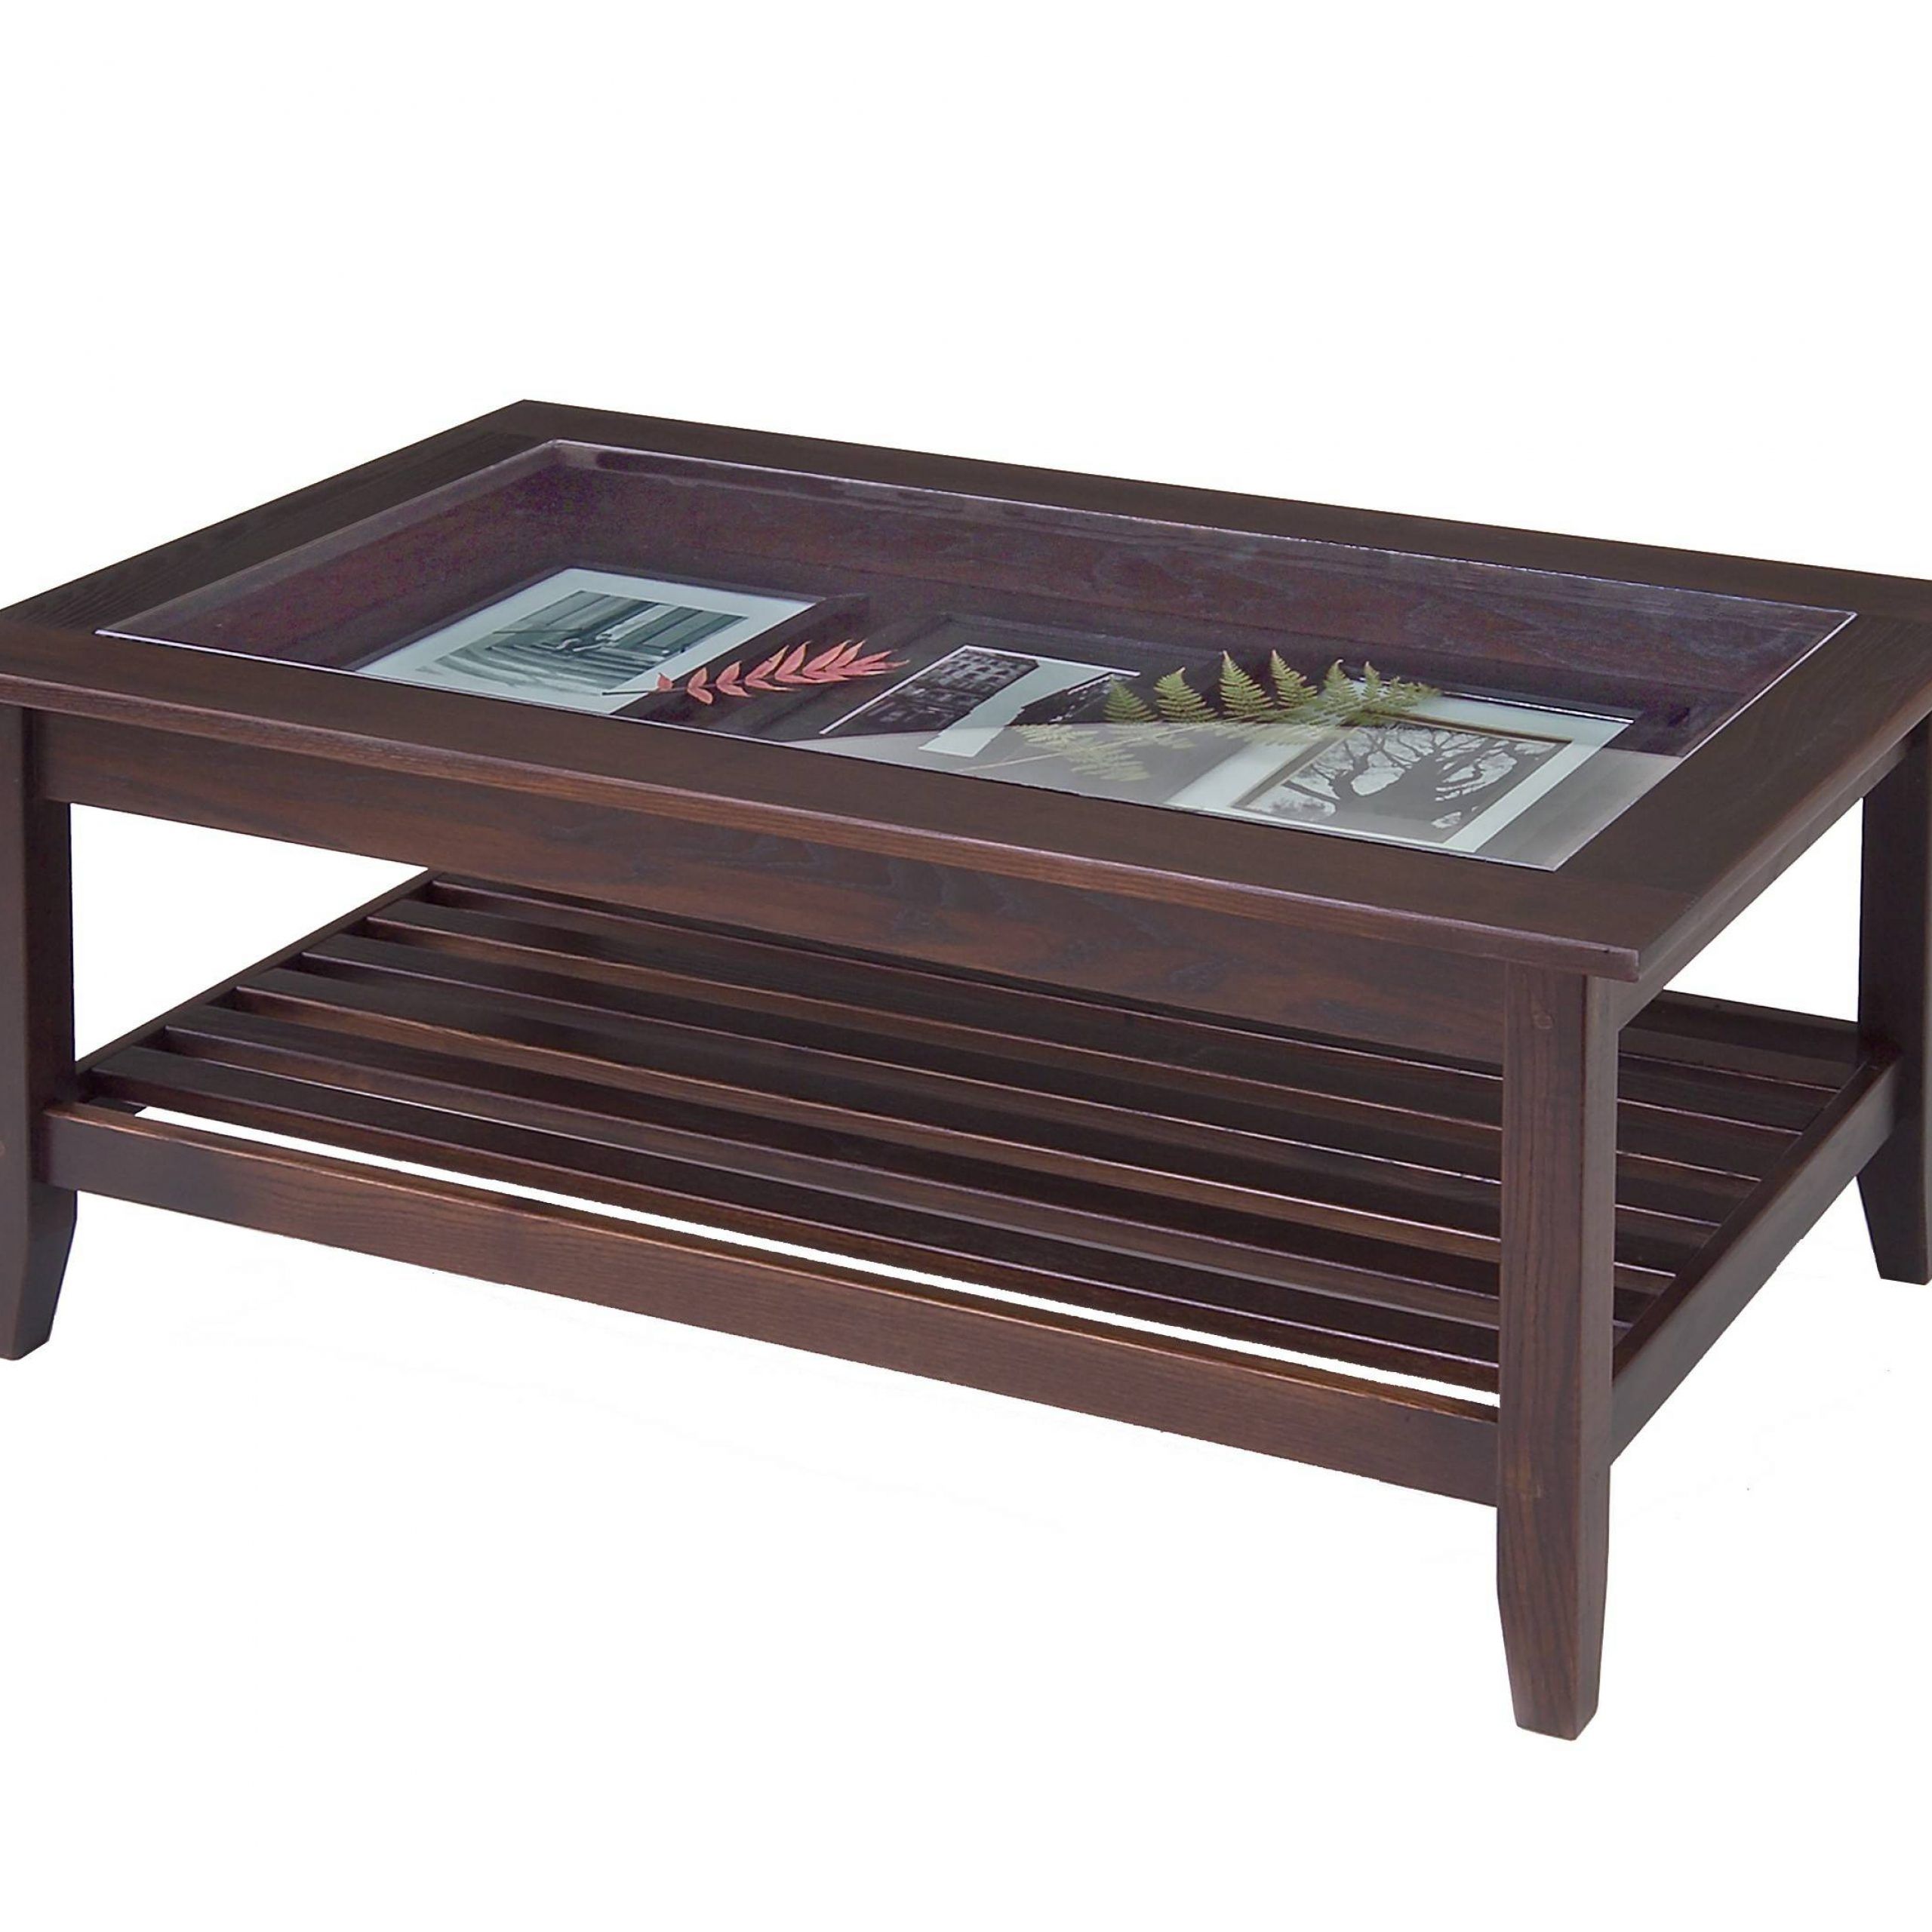 Glass Top Display Coffee Table Furniture Manchester Wood Within Espresso Wood And Glass Top Console Tables (View 18 of 20)